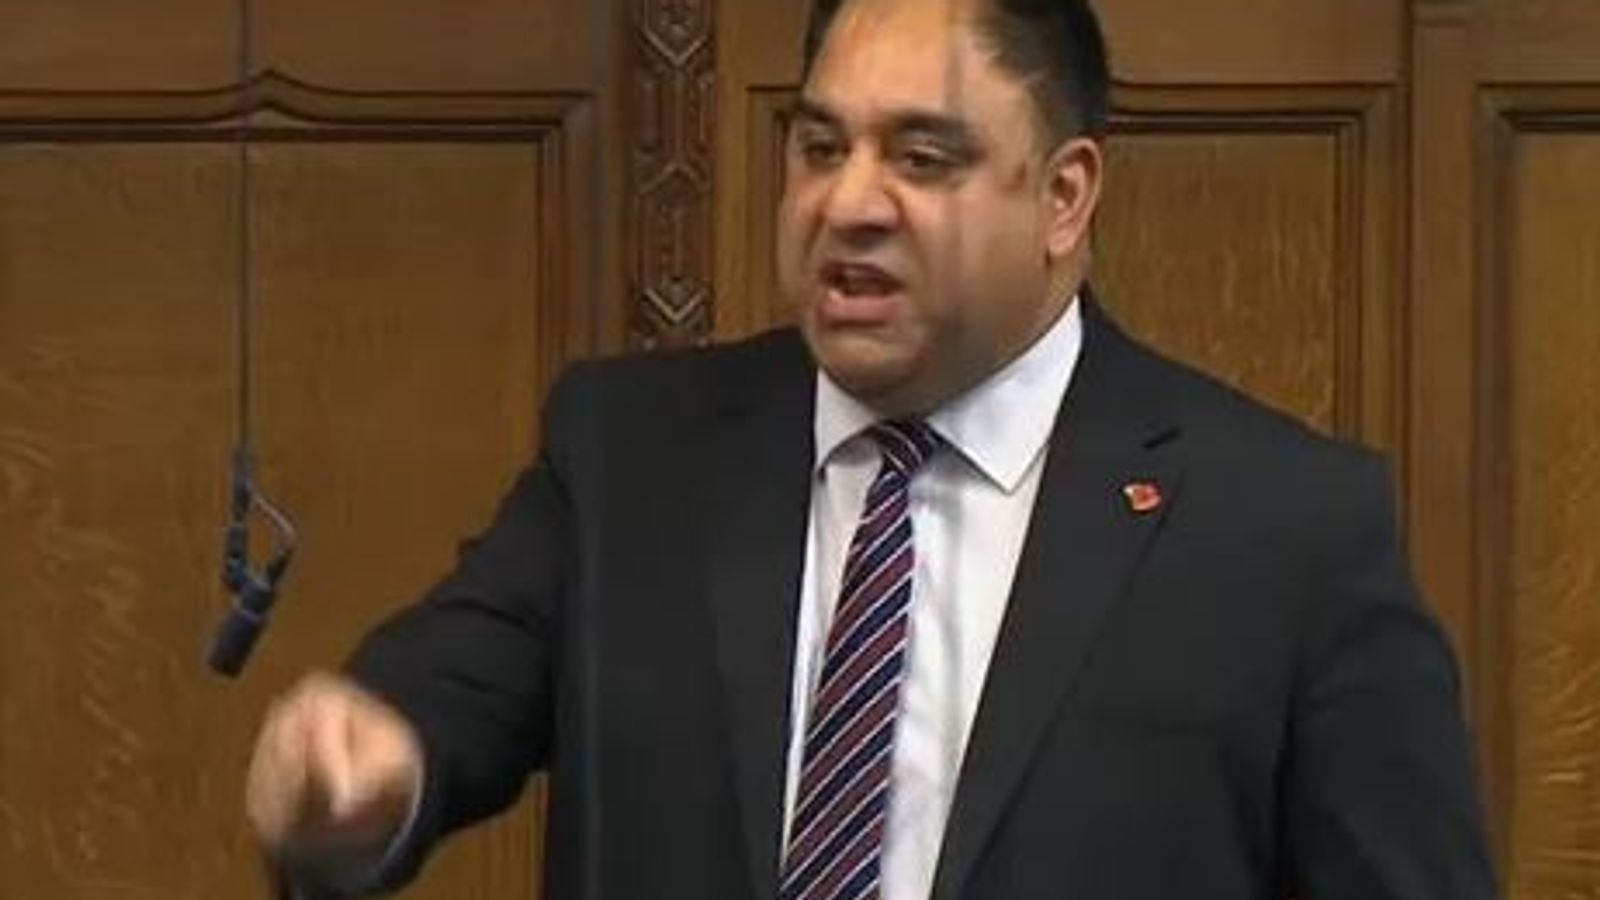 Imran Hussain resigns as shadow minister over Starmer's position on Israel-Hamas ceasefire